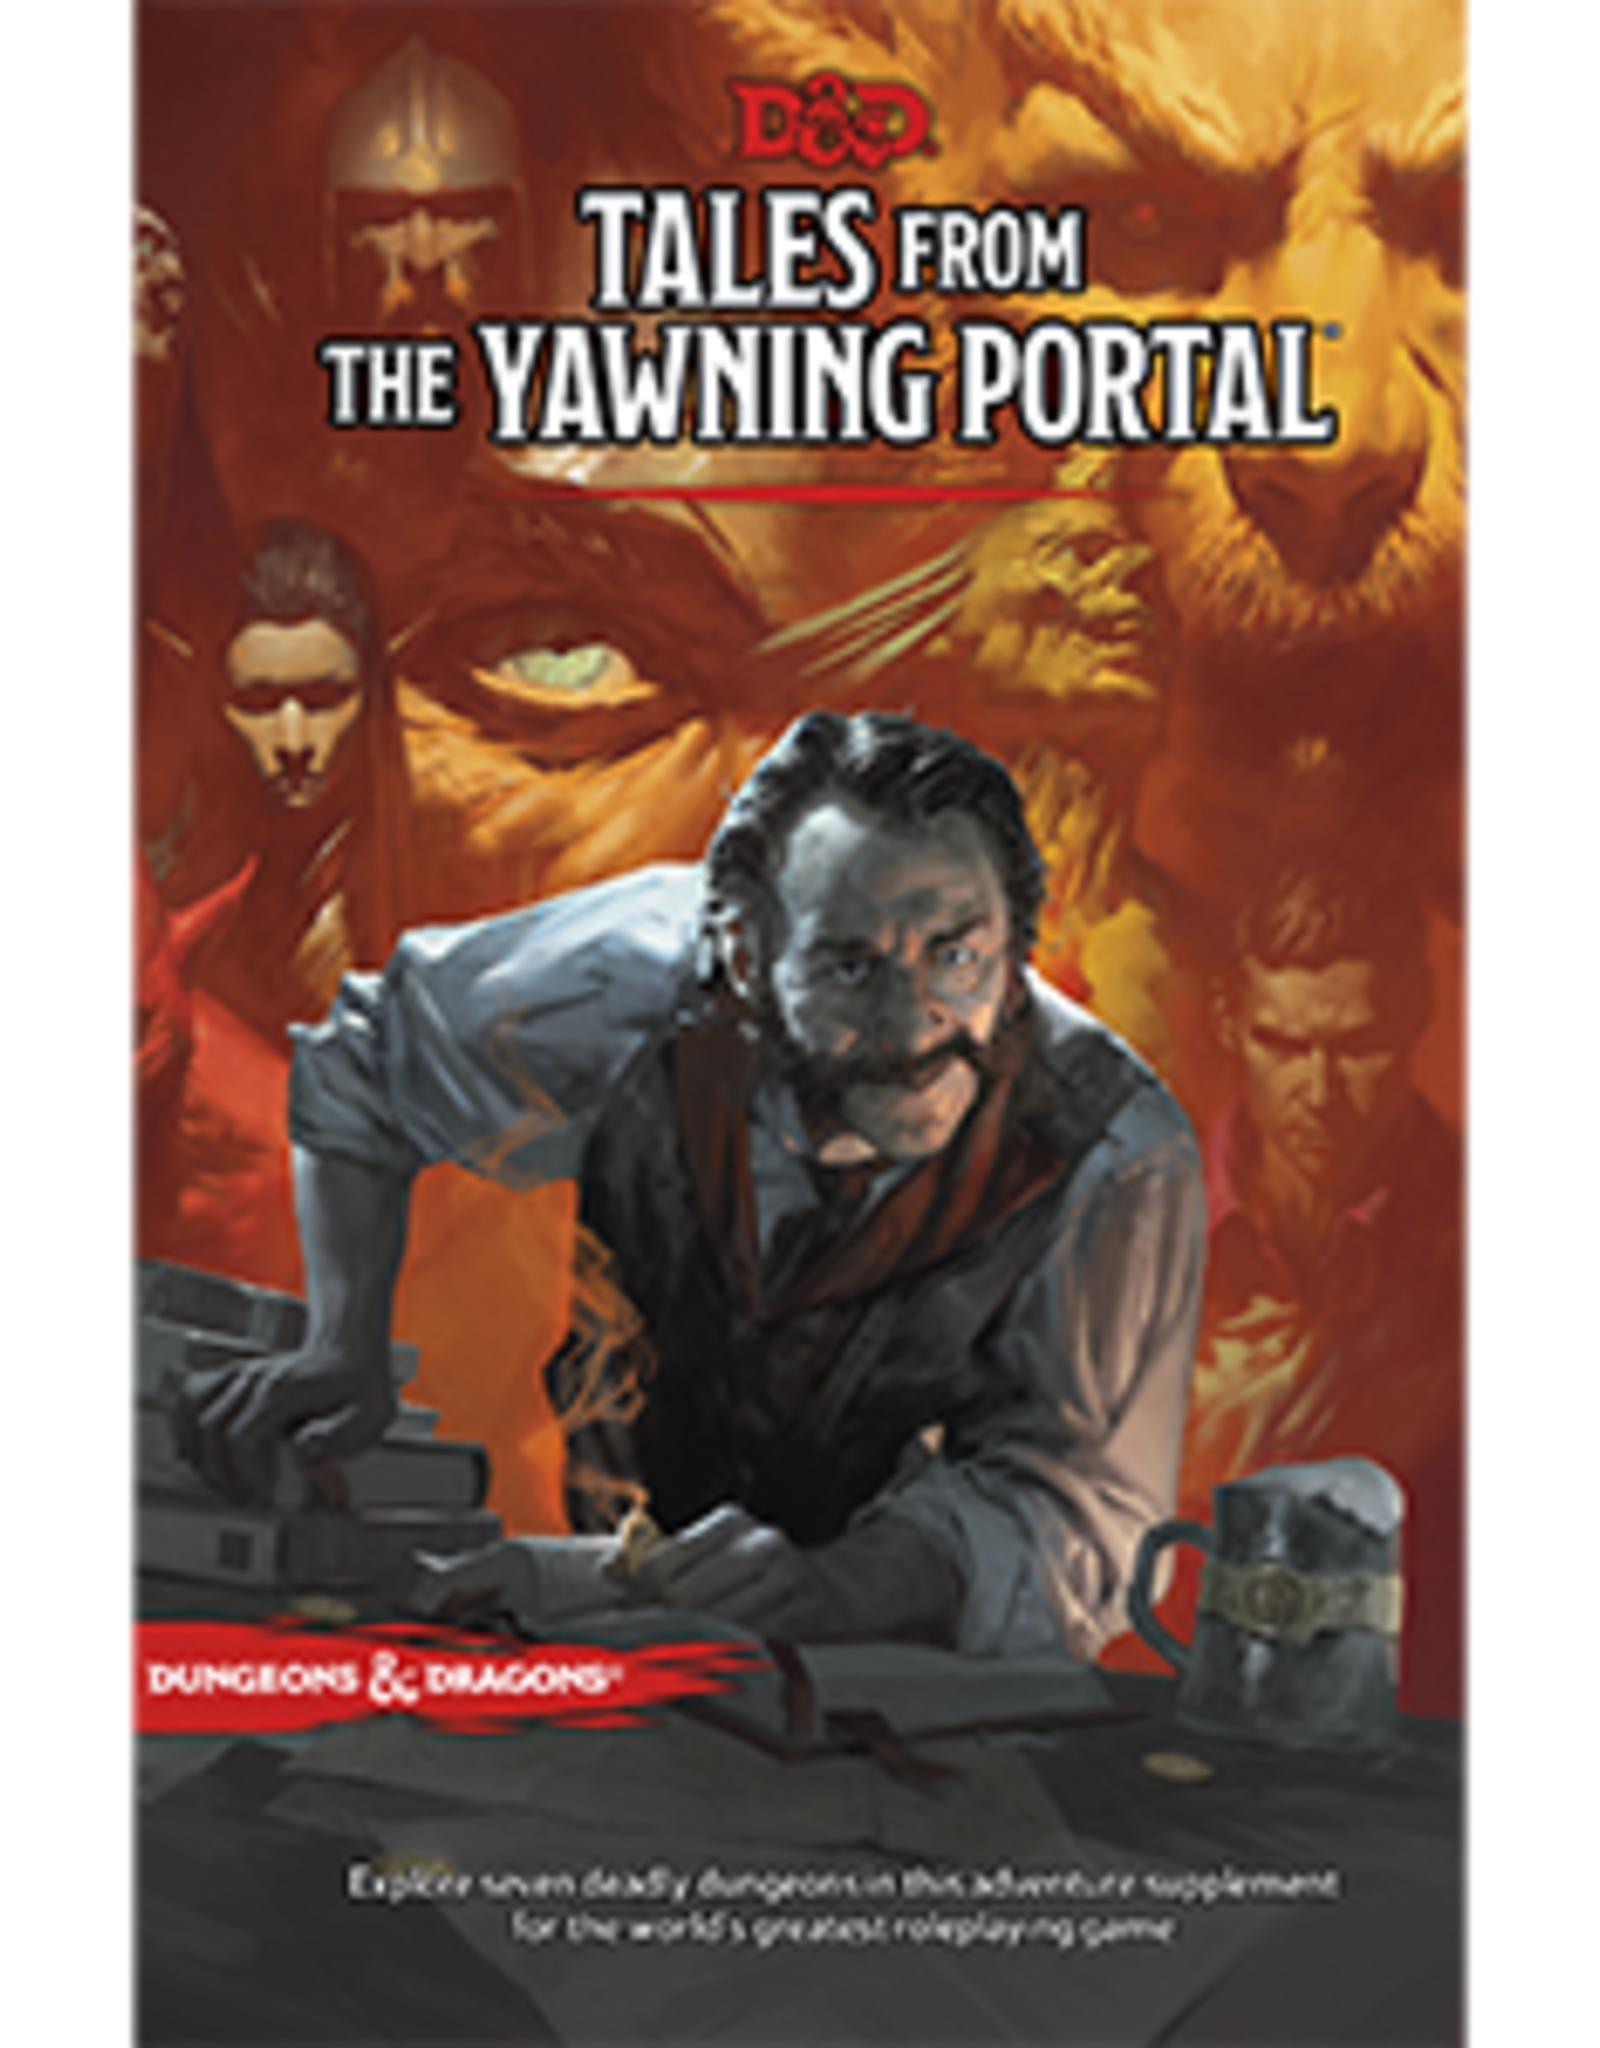 WOTC D&D RPG: 5th Ed:  Tales from the Yawning Portal